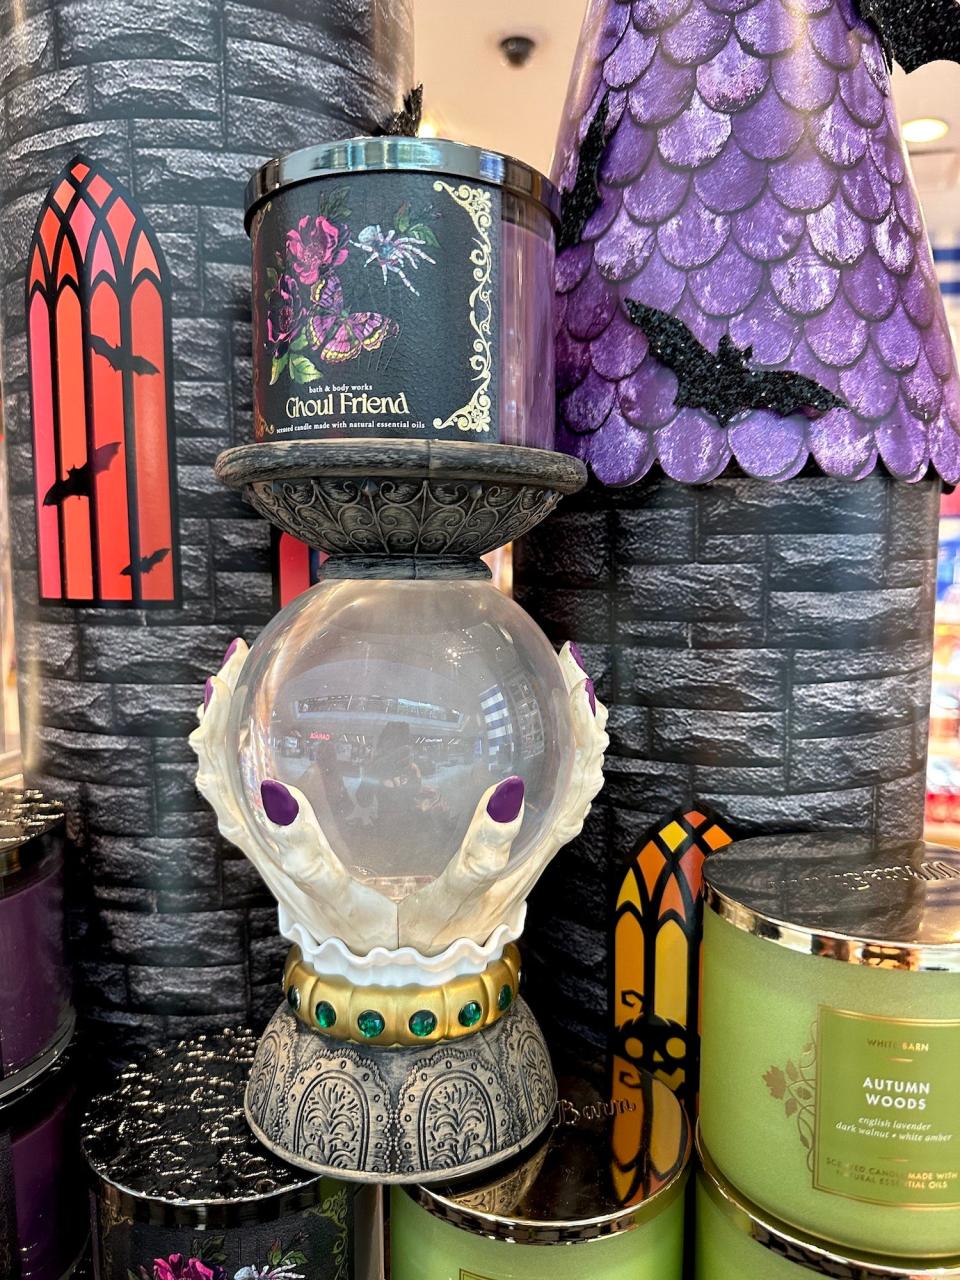 The Fortune Teller Waterglobe candle stand from Bath & Body Works.